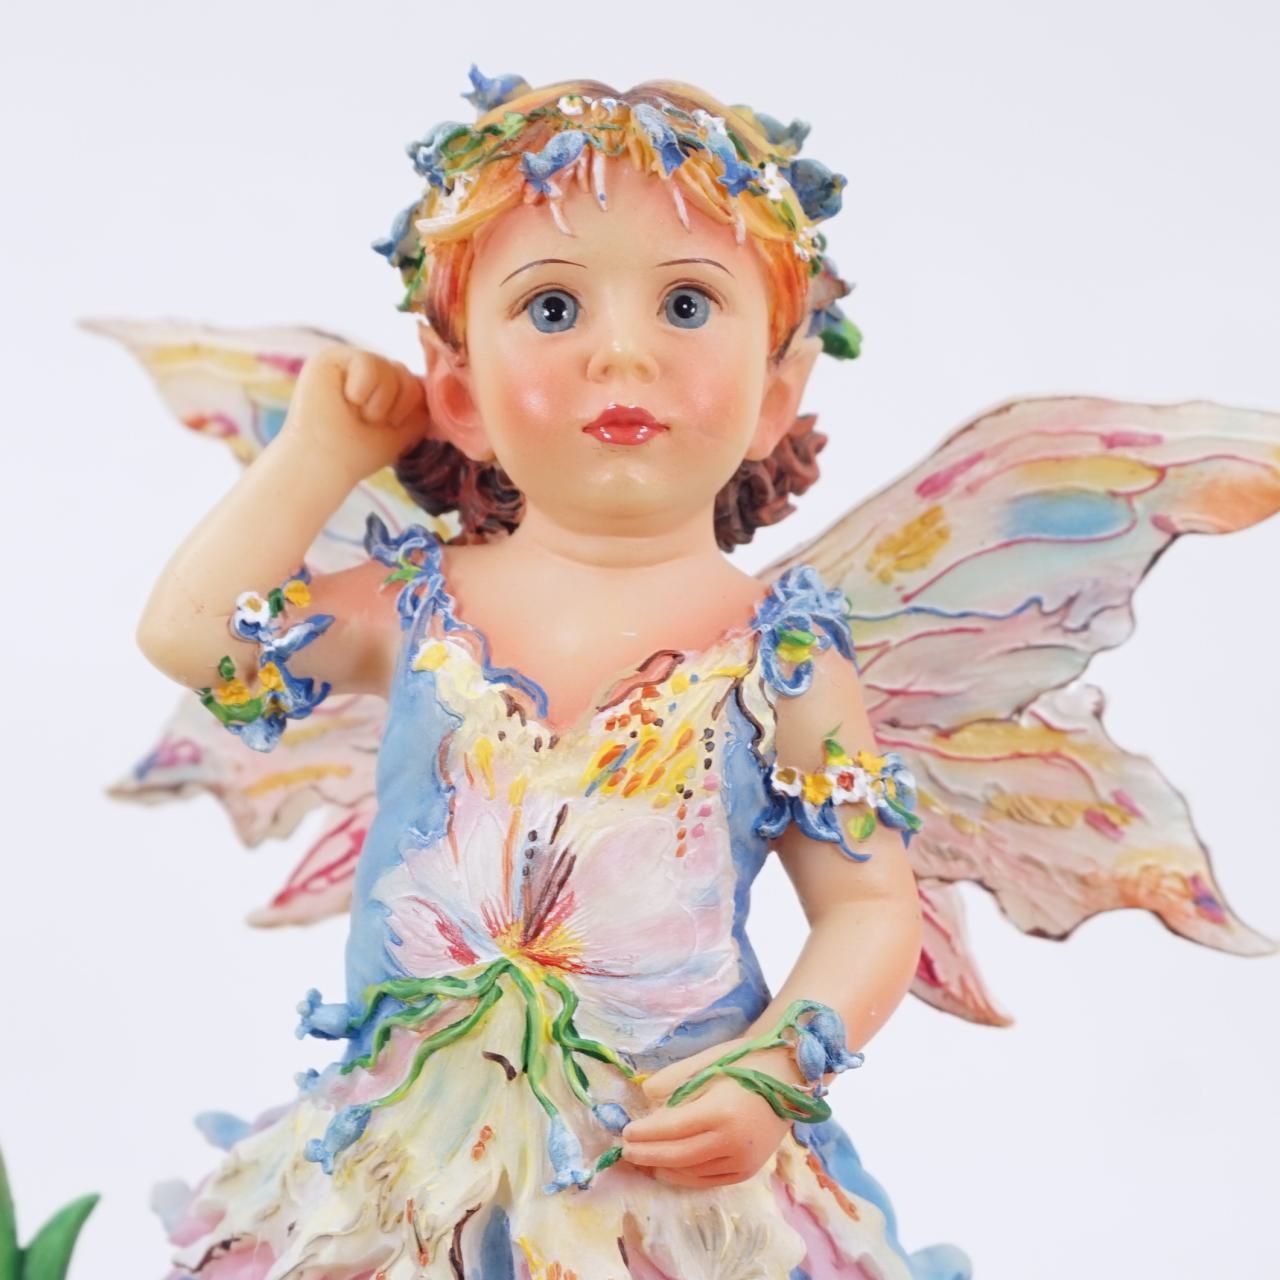 Crisalis Collection★ Wooded Bluebell Faerie (1-3392) 20% OFF